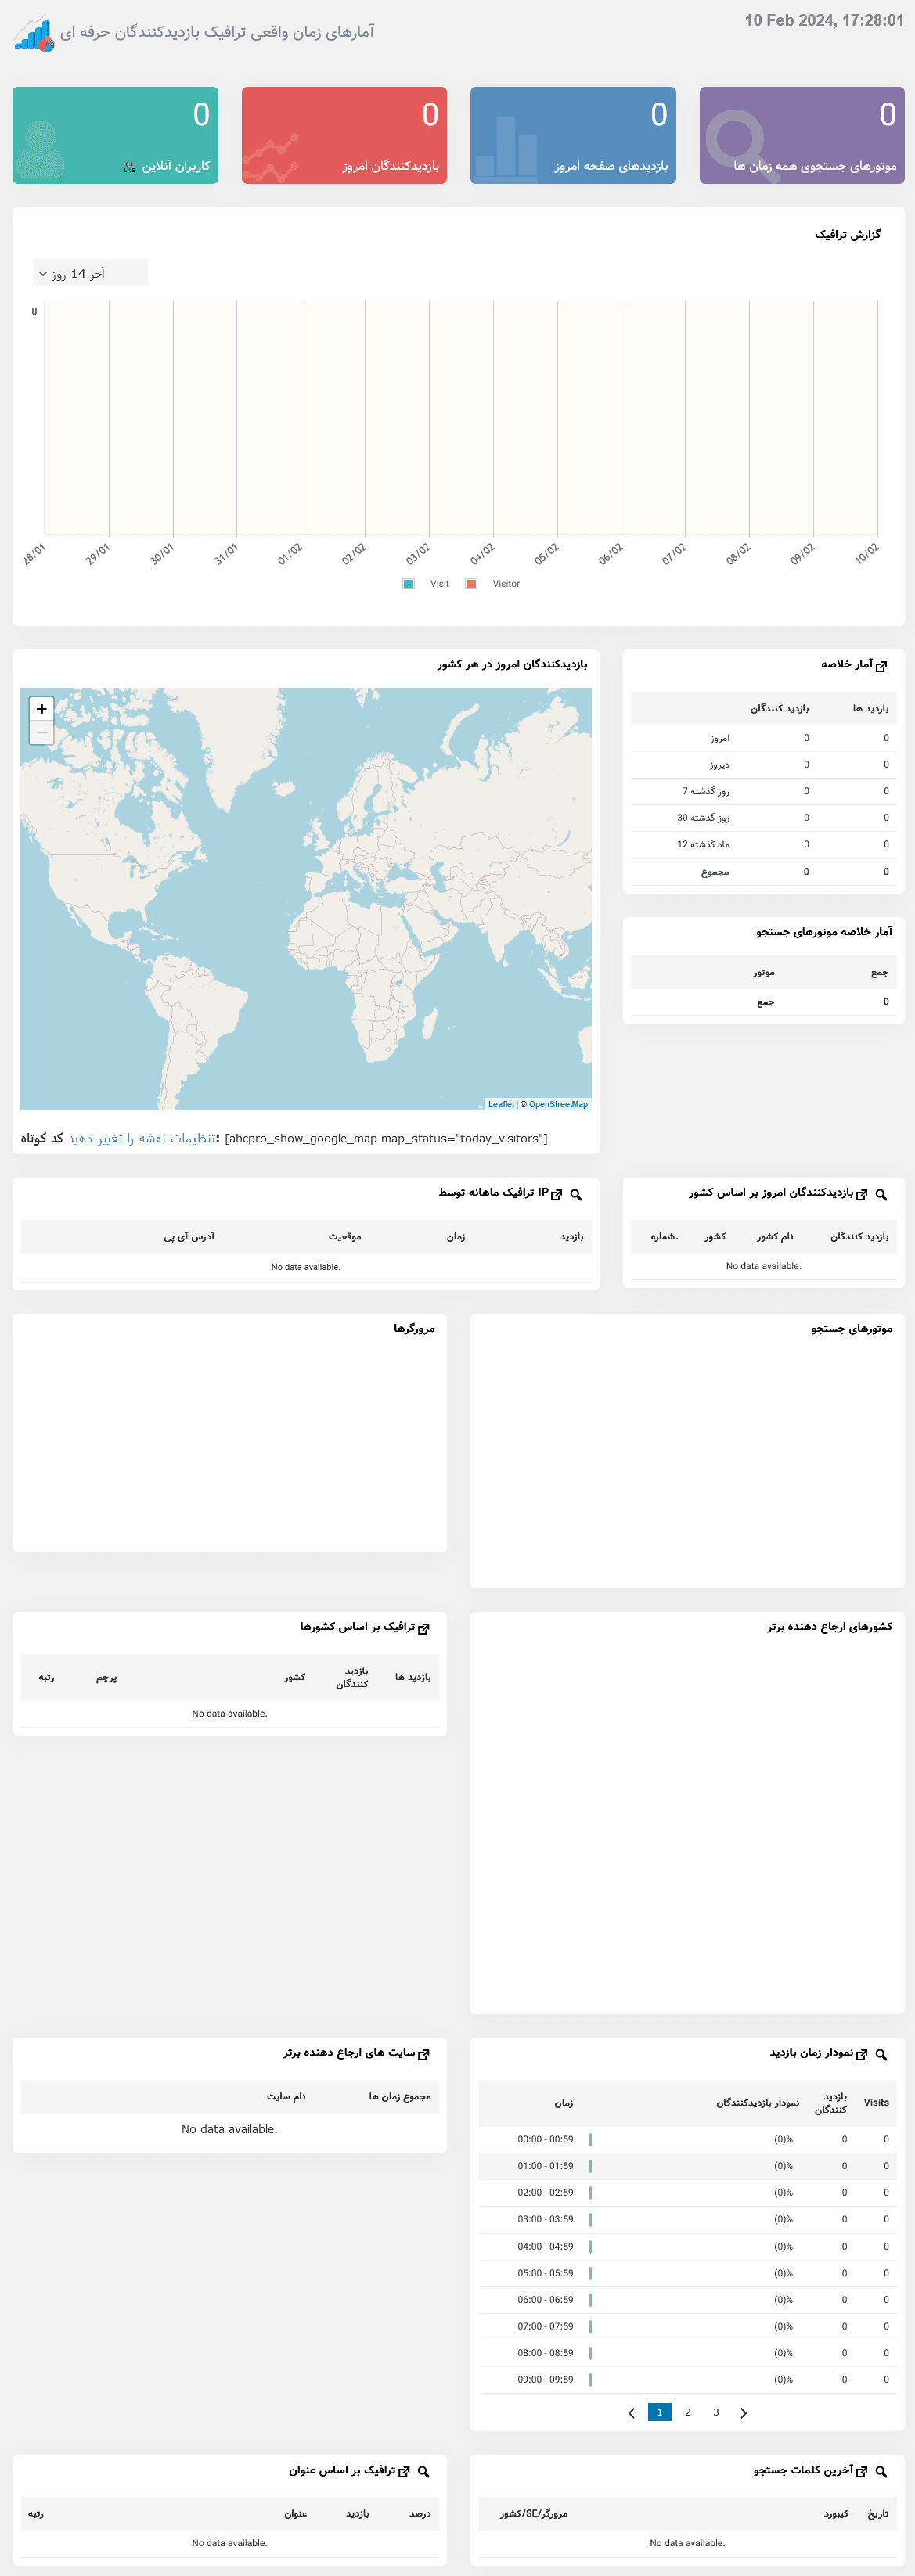 Visitor Traffic Real Time Statistics